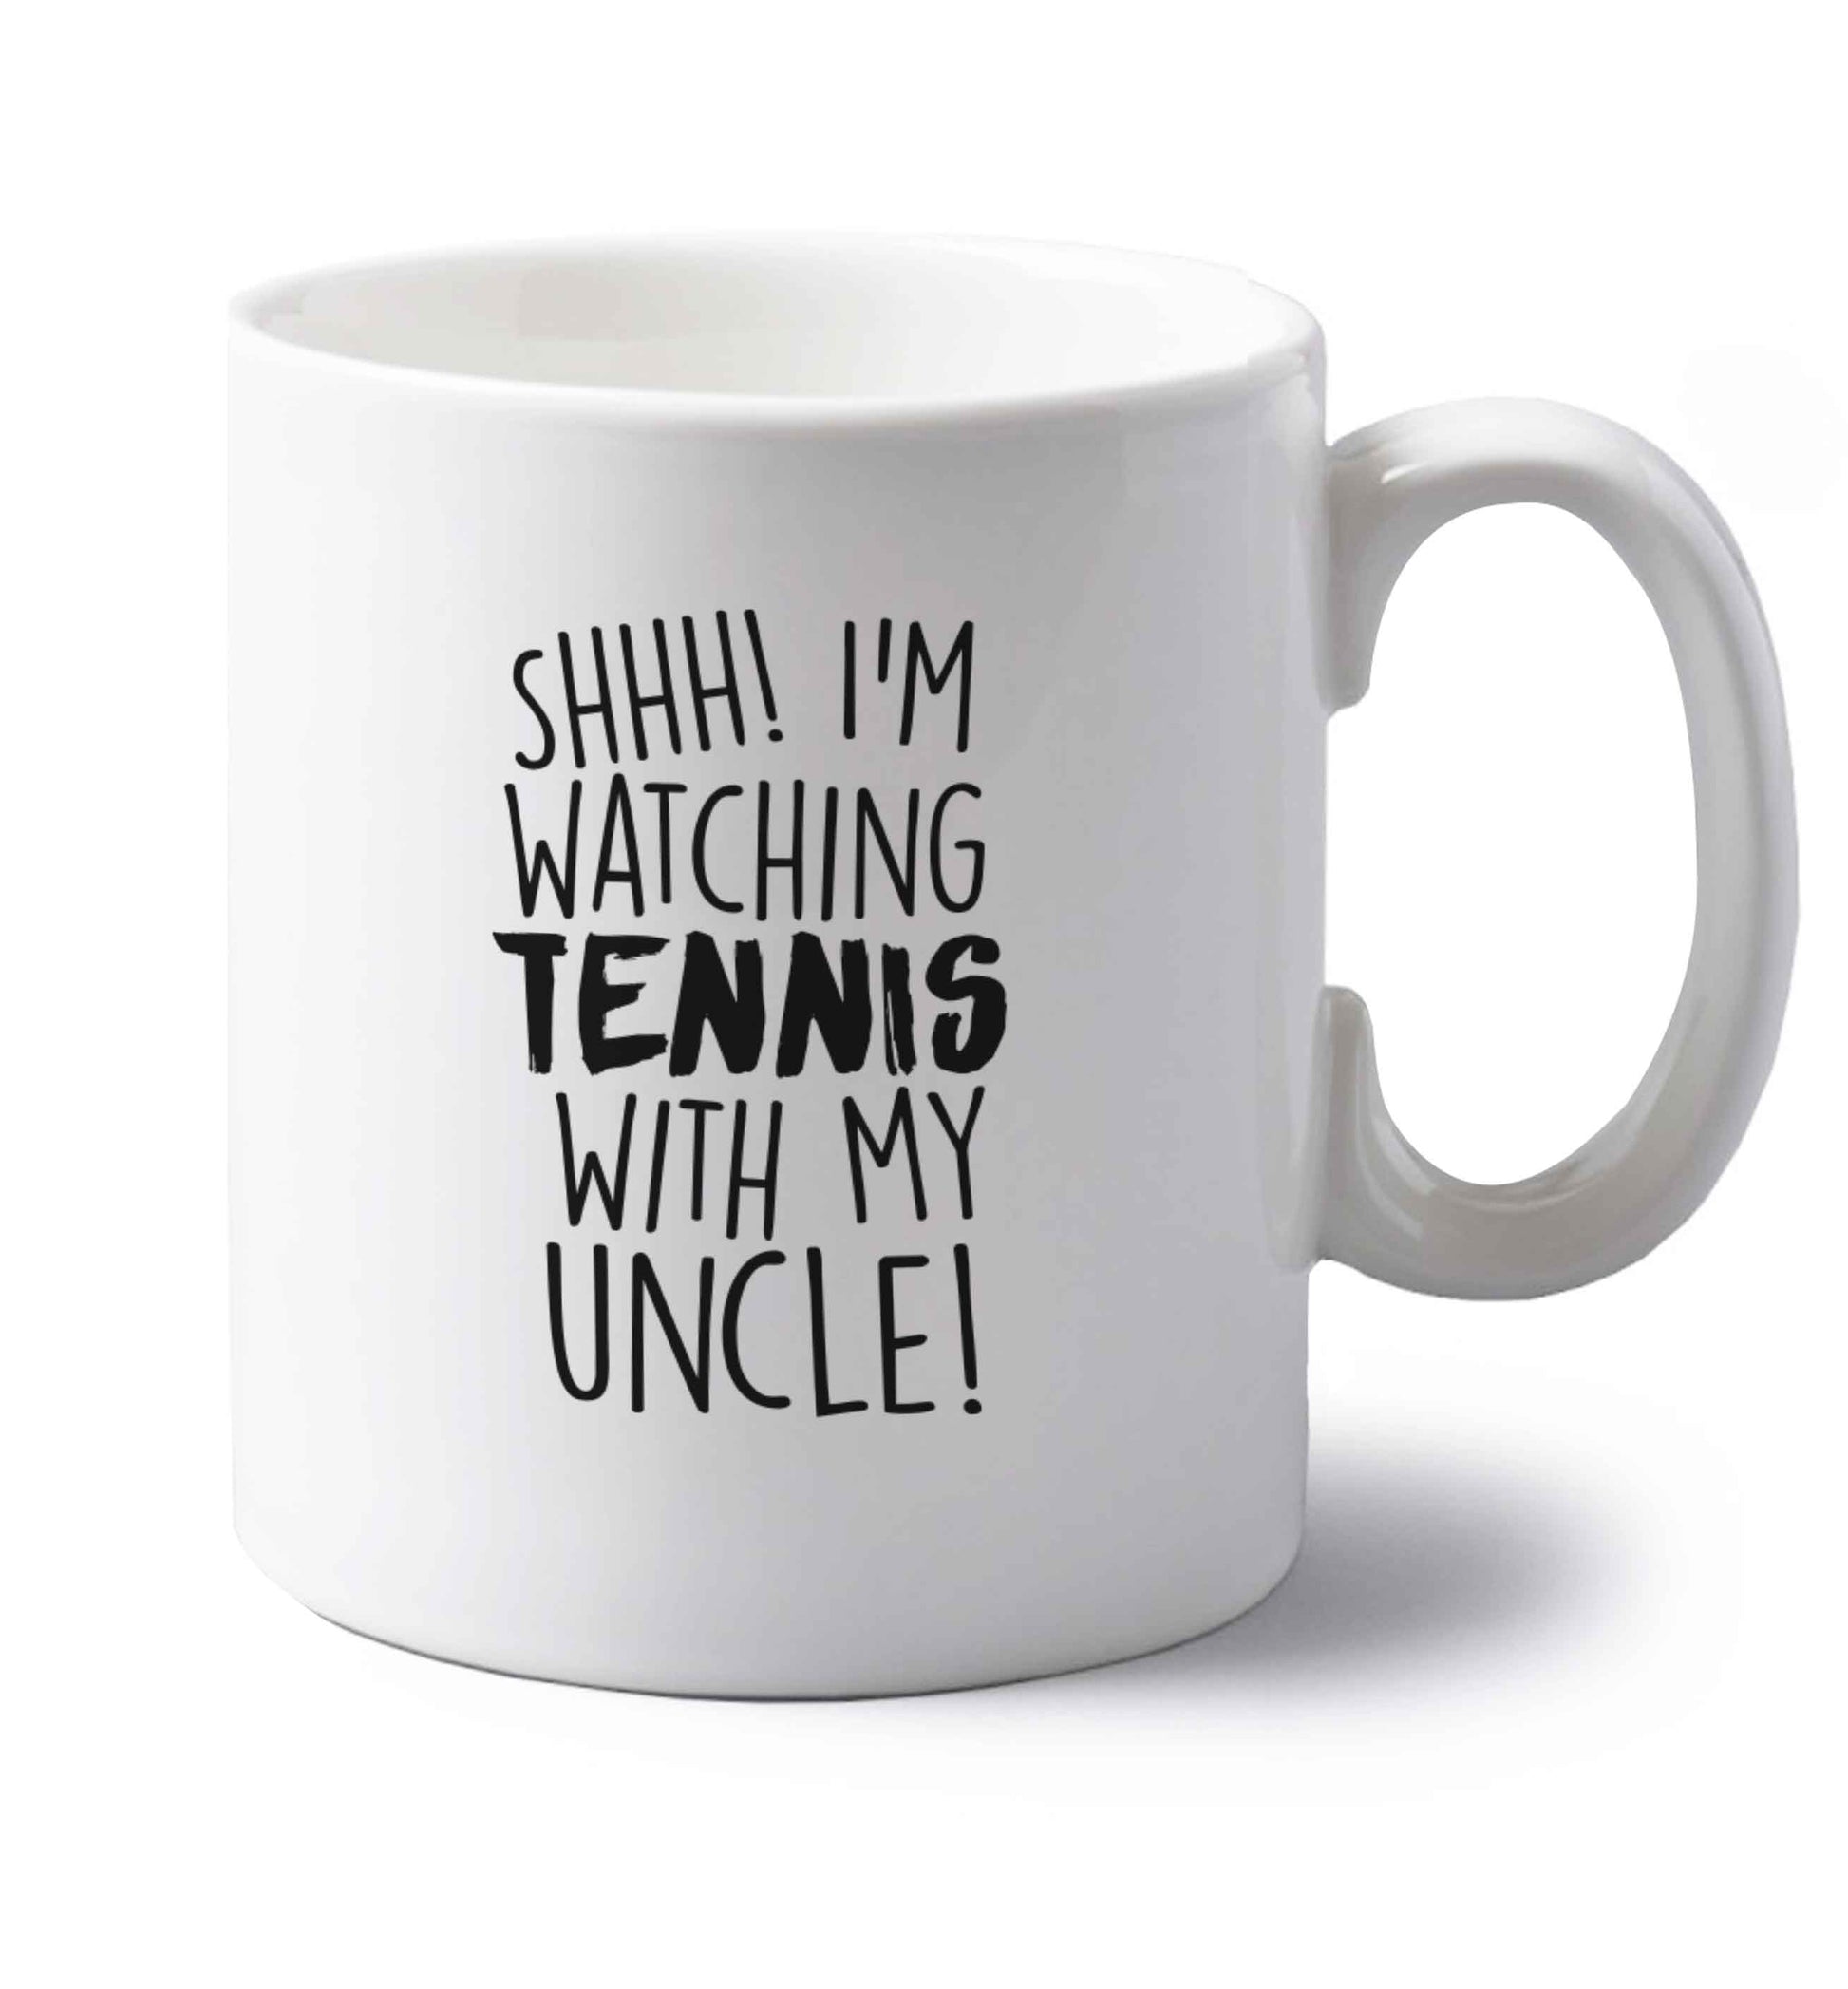 Shh! I'm watching tennis with my uncle! left handed white ceramic mug 